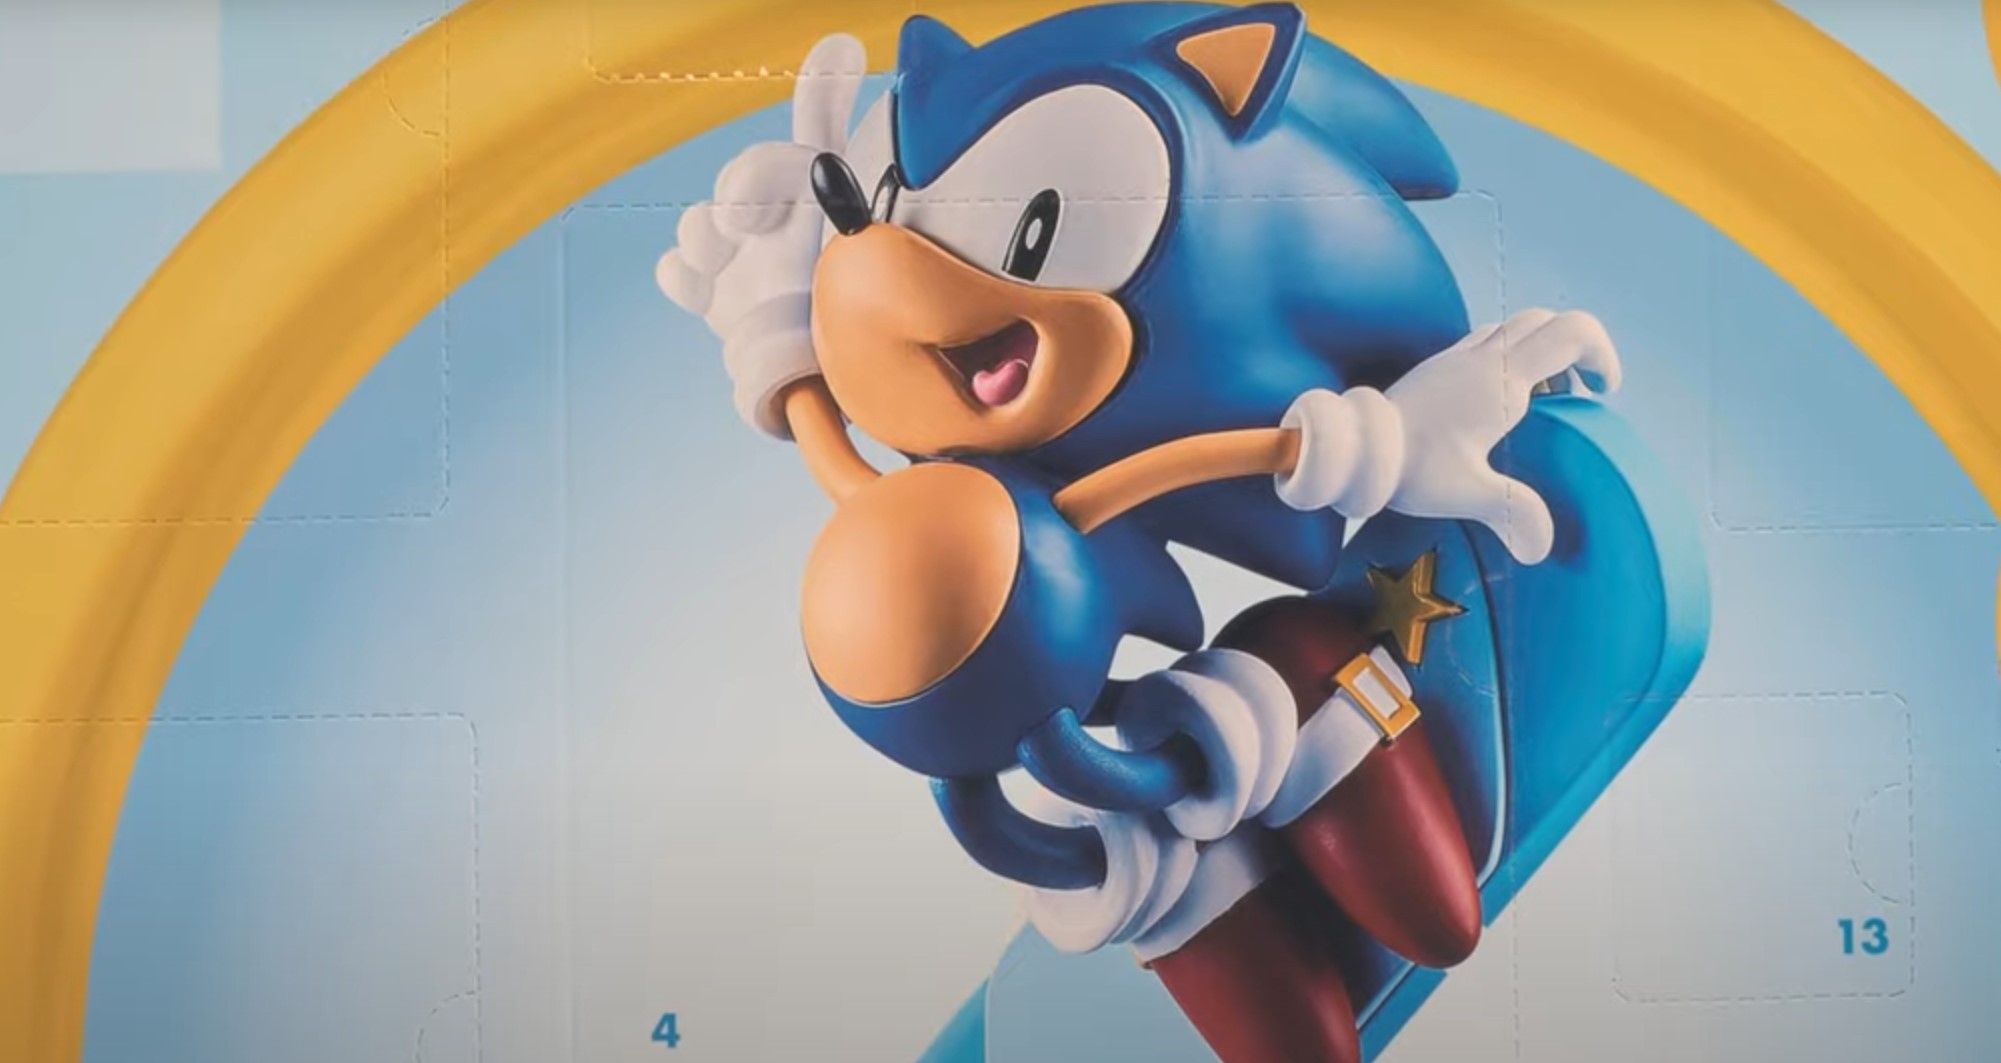 Sonic the Hedgehog Advent Calendar Gives You One Little Piece Of Sonic